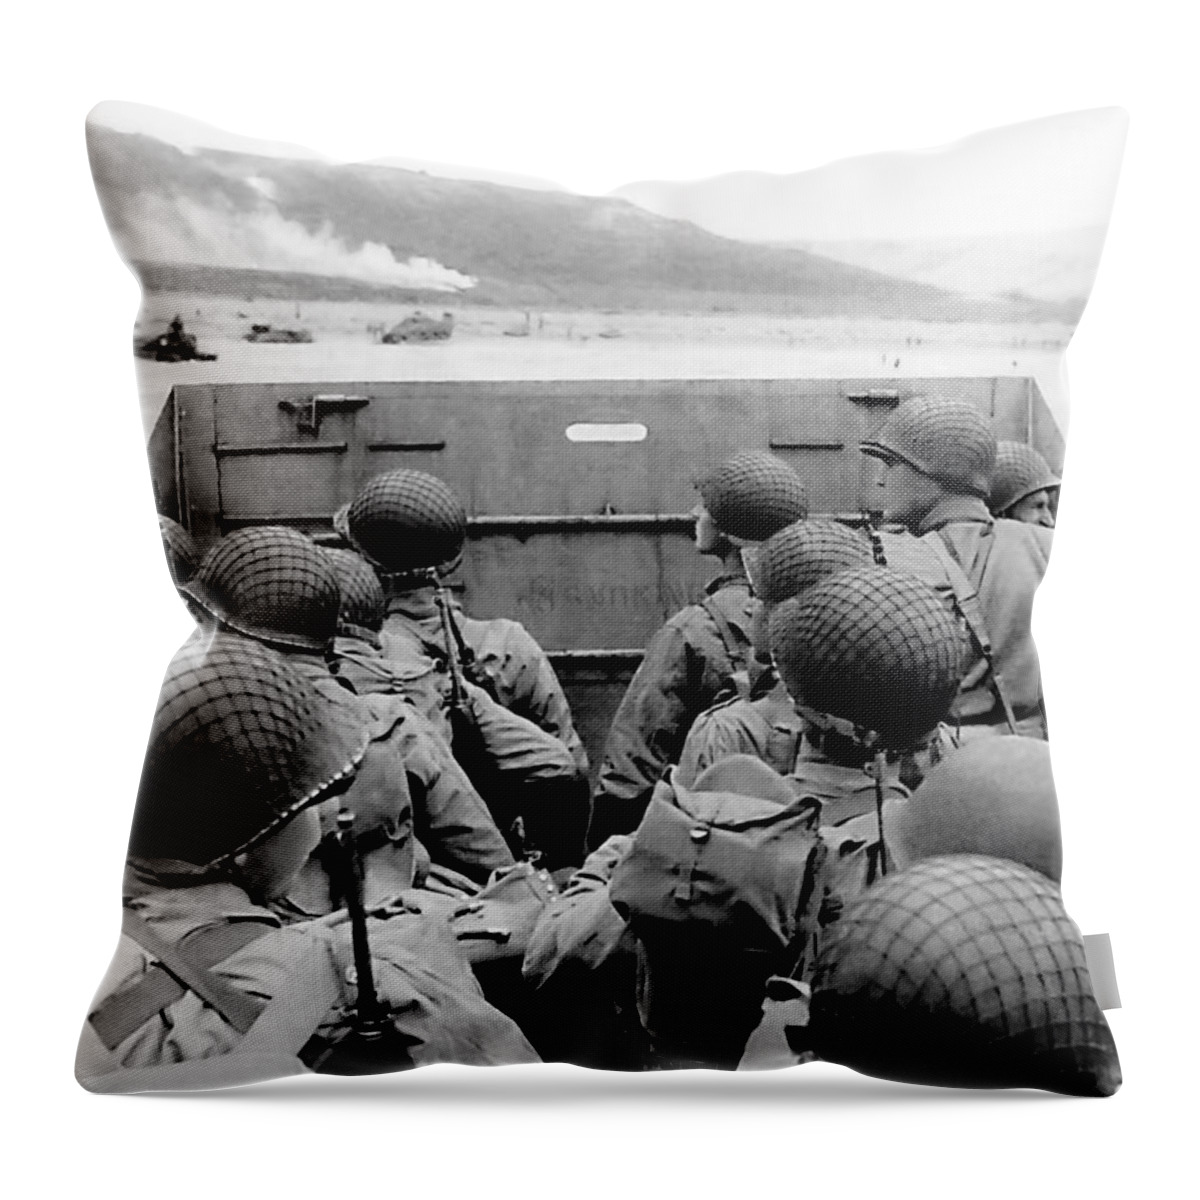 Invasion Of Normandy Throw Pillow featuring the photograph Approaching Omaha Beach - Invasion of Normandy - June 6, 1944 by War Is Hell Store